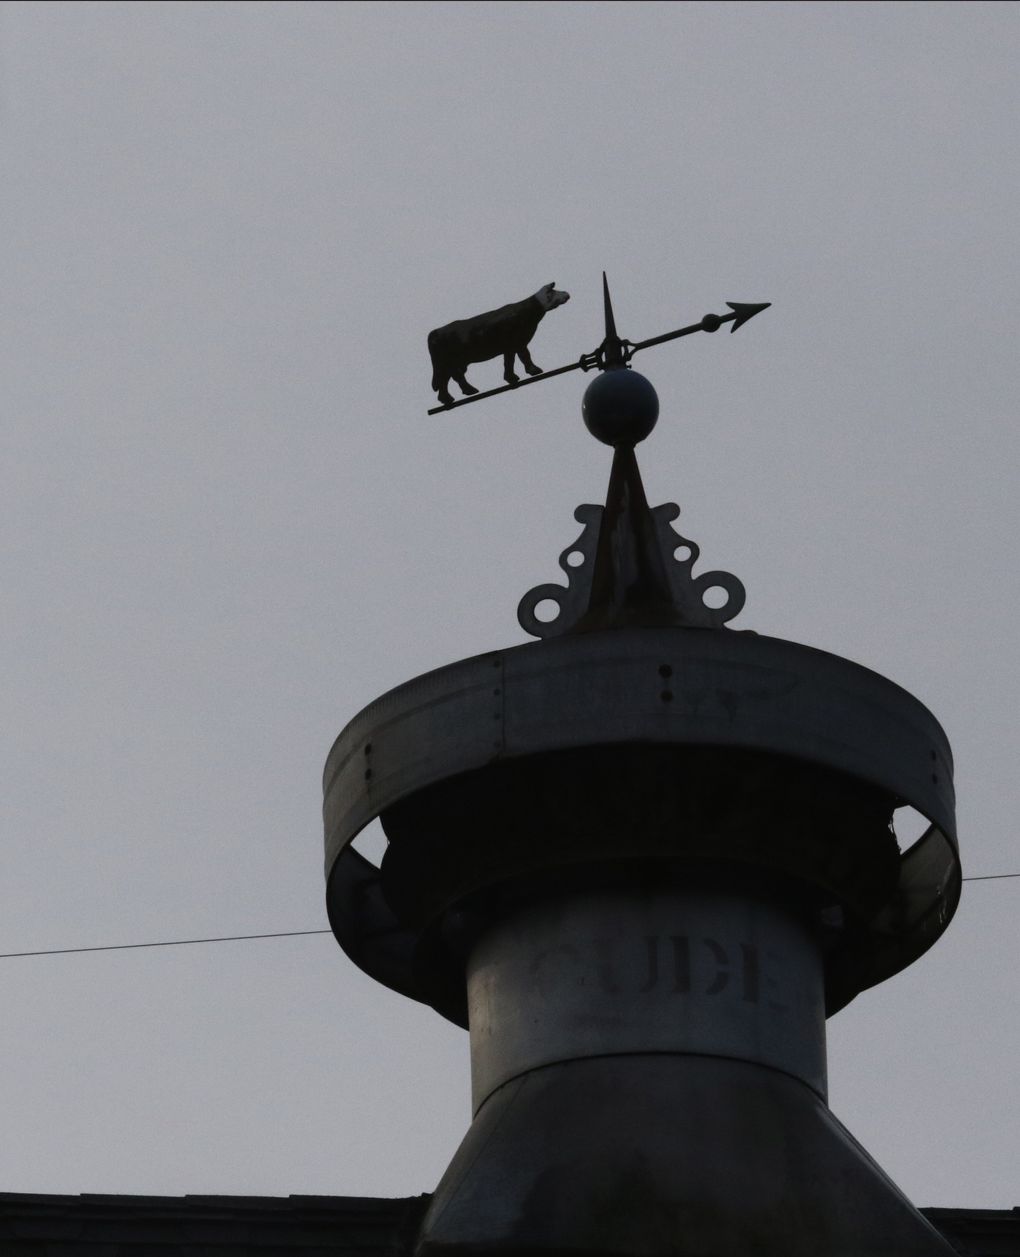 An old weather vane atop a barn at Nick Pate’s Raising Cane Ranch points toward grassy fields in the Snohomish River Valley. (Alan Berner/The Seattle Times)